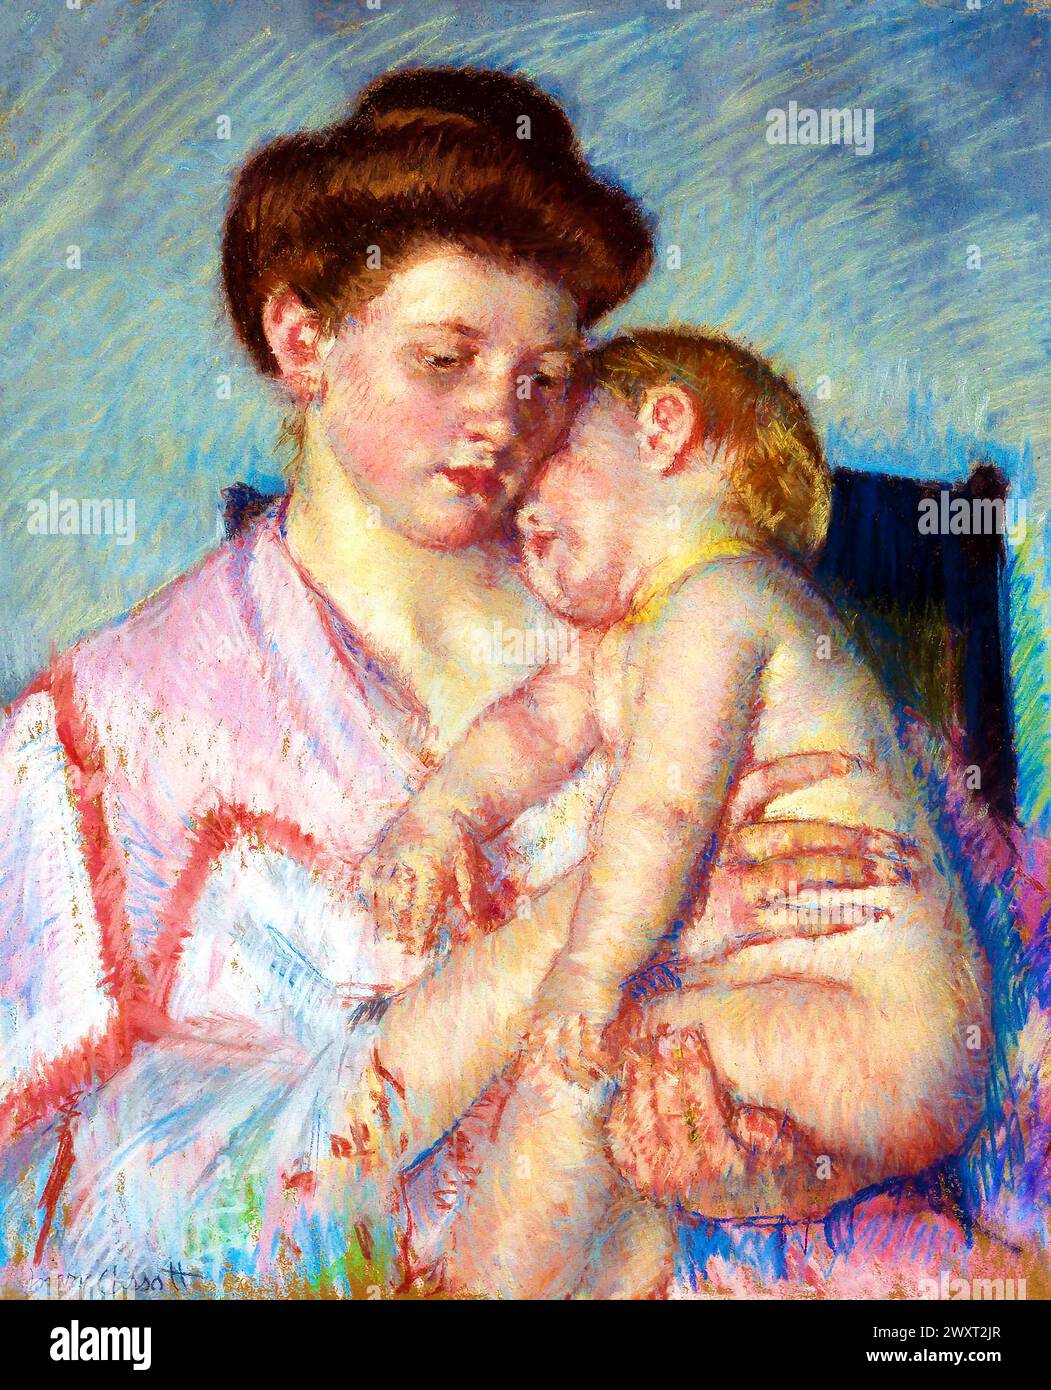 Sleepy Baby  painting in high resolution by Mary Cassatt. Original from the Dallas Museum of Art. Stock Photo